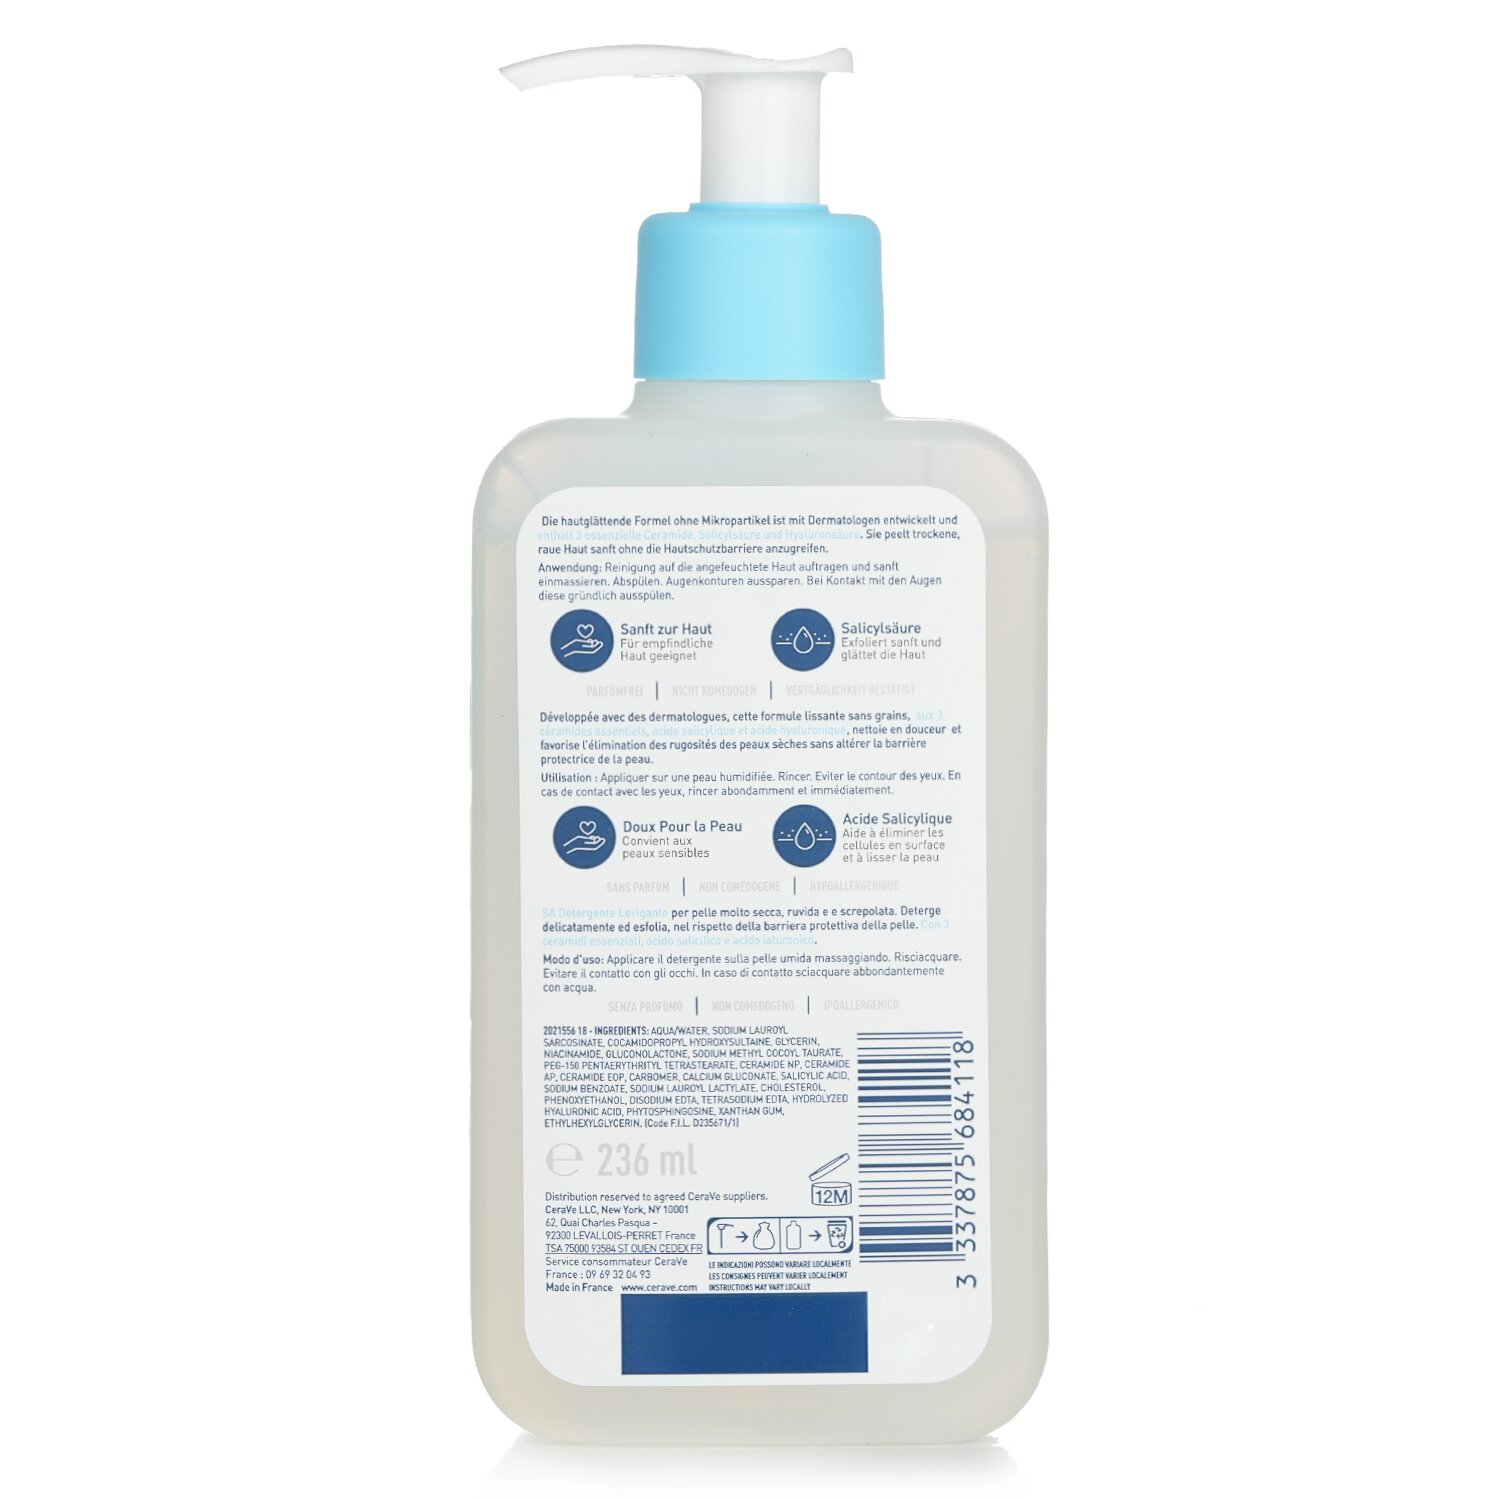 CeraVe Smoothing Cleanser SA 236ml/8oz